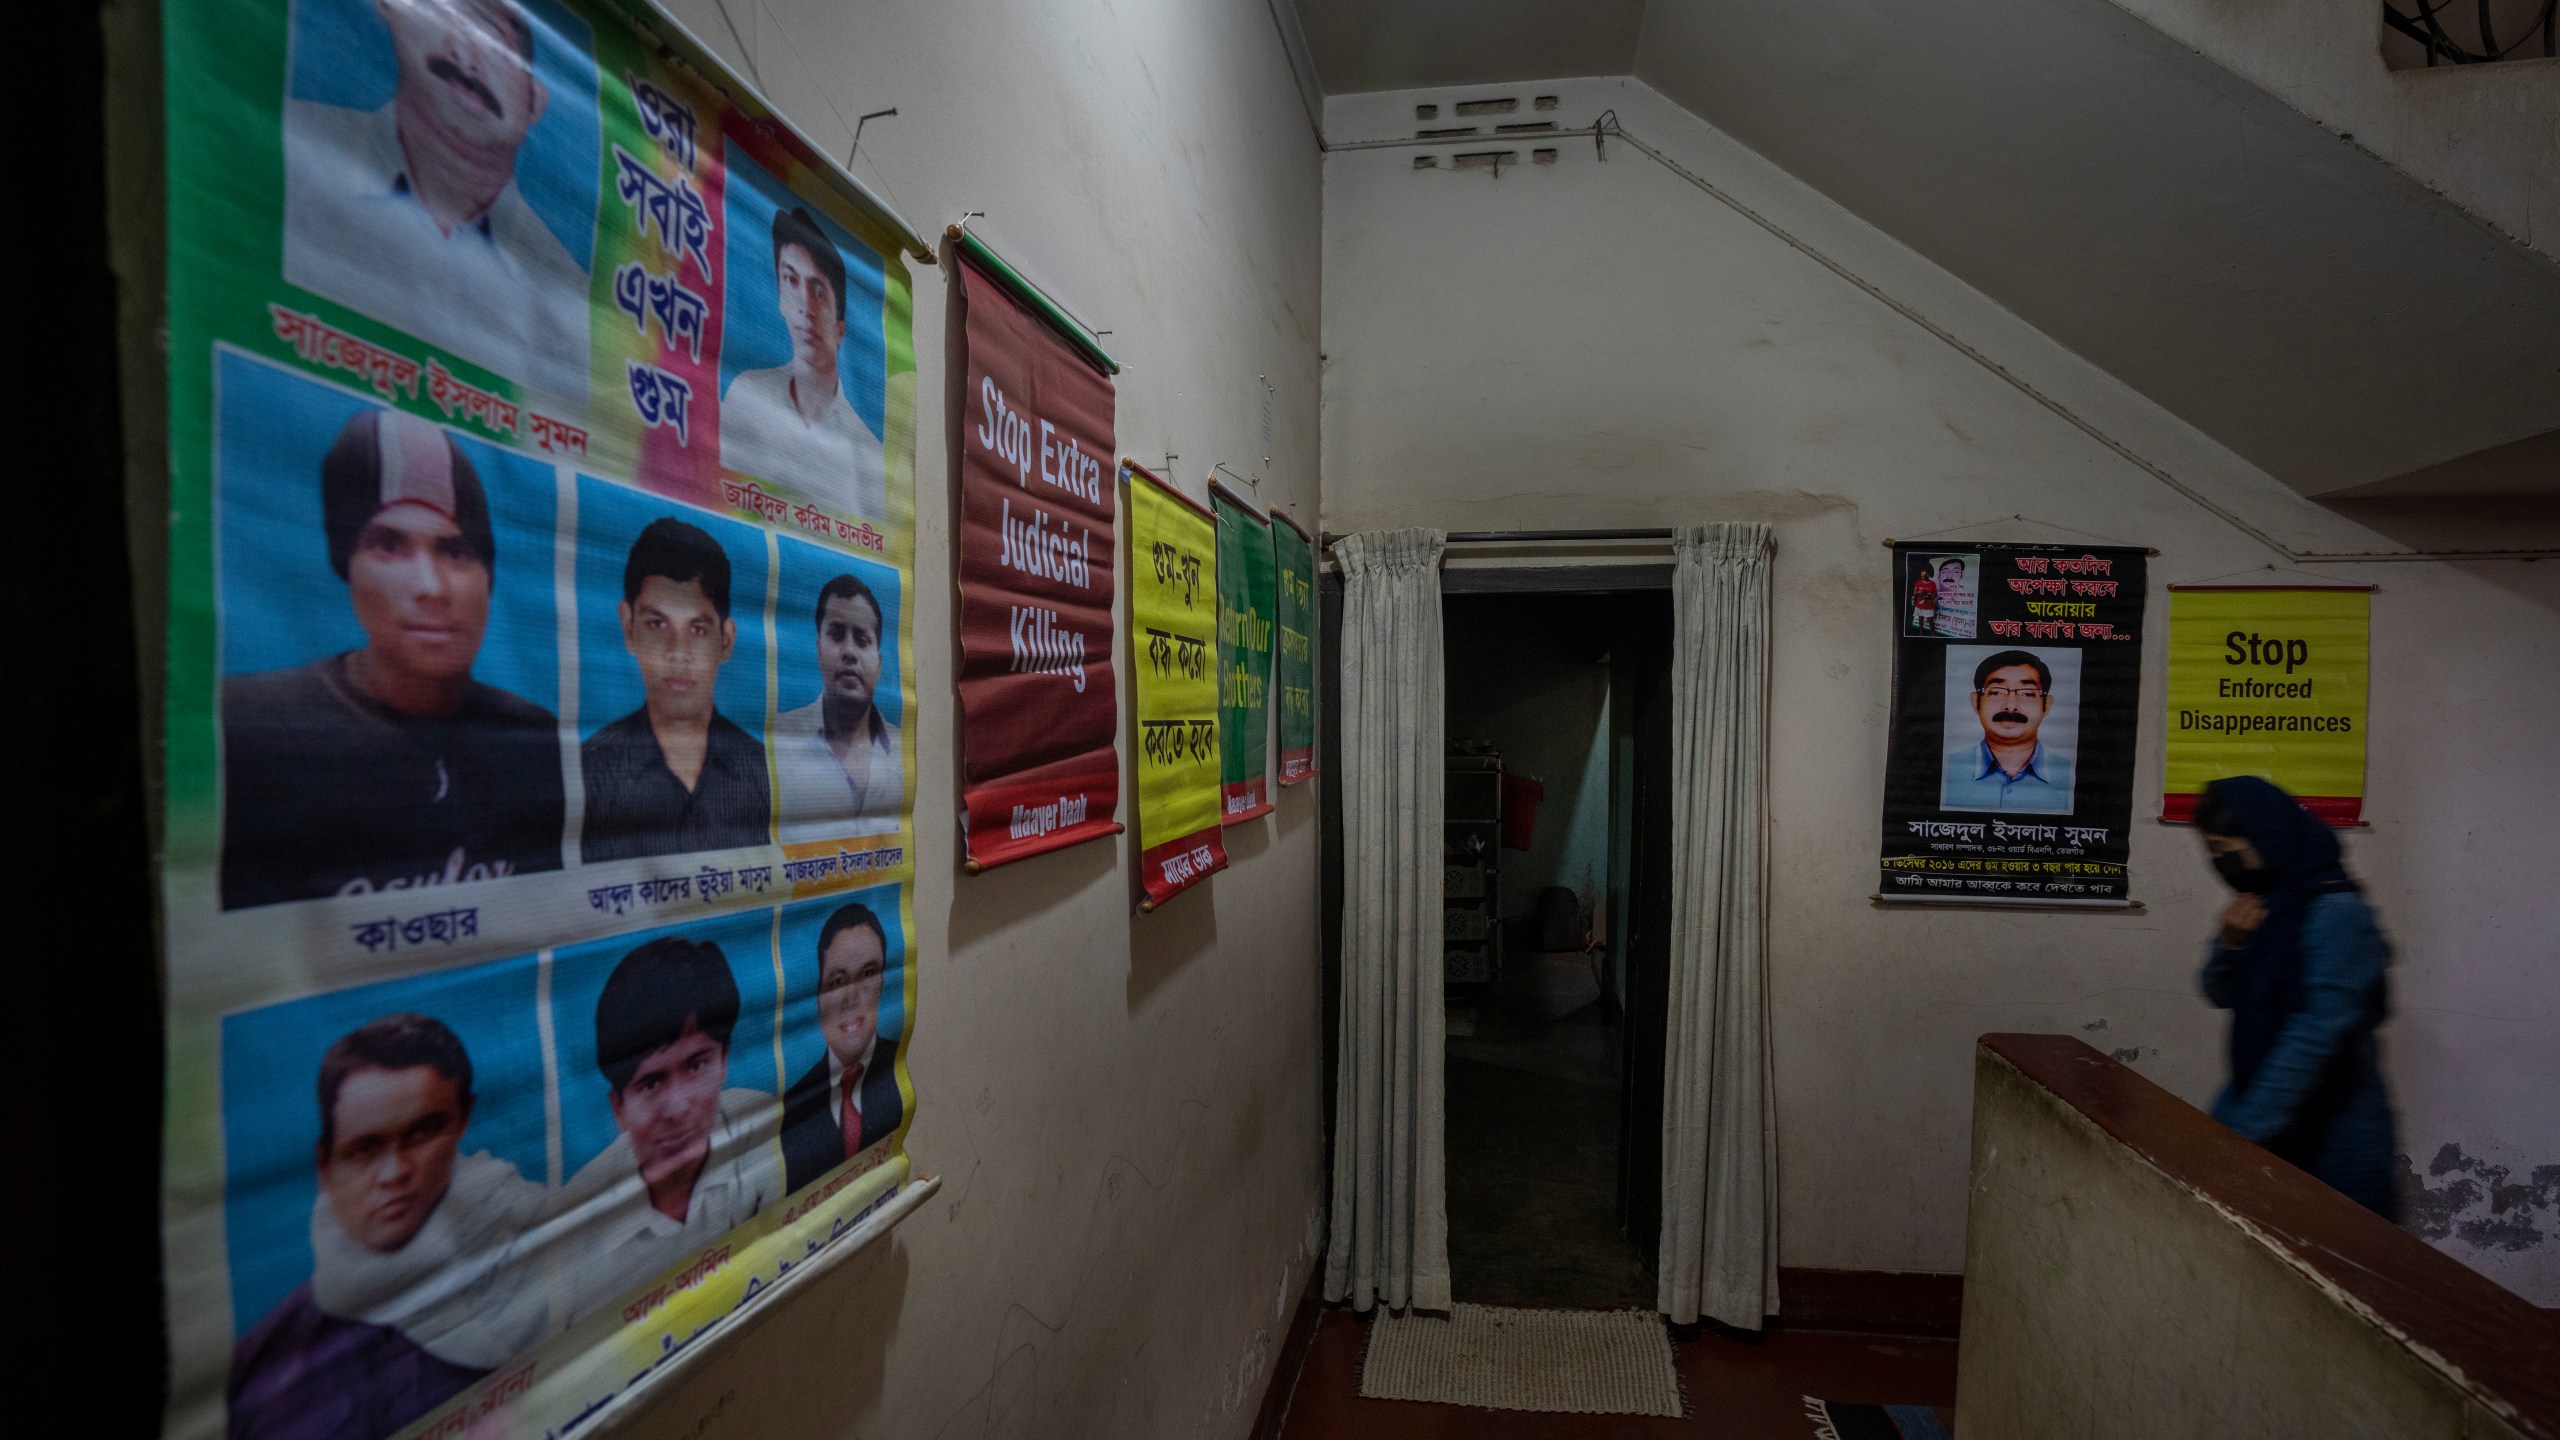 Anisha Islam Insha, 17, daughter of Ismail Hossain Baten, who disappeared in 2019, walks in the office of Mayer Daak, Mother's Call, a platform for family members of victims of enforced disappearances in Bangladesh, in Dhaka, Bangladesh, Thursday, Jan. 4, 2024. The main opposition Bangladesh Nationalist Party, led by former premier Khaleda Zia, have accused Prime Minister Sheikh Hasina's government of a major crackdown targeting its supporters and opposition politicians on what they say are trumped-up charges in the lead-up to the polls. (AP Photo/Altaf Qadri)